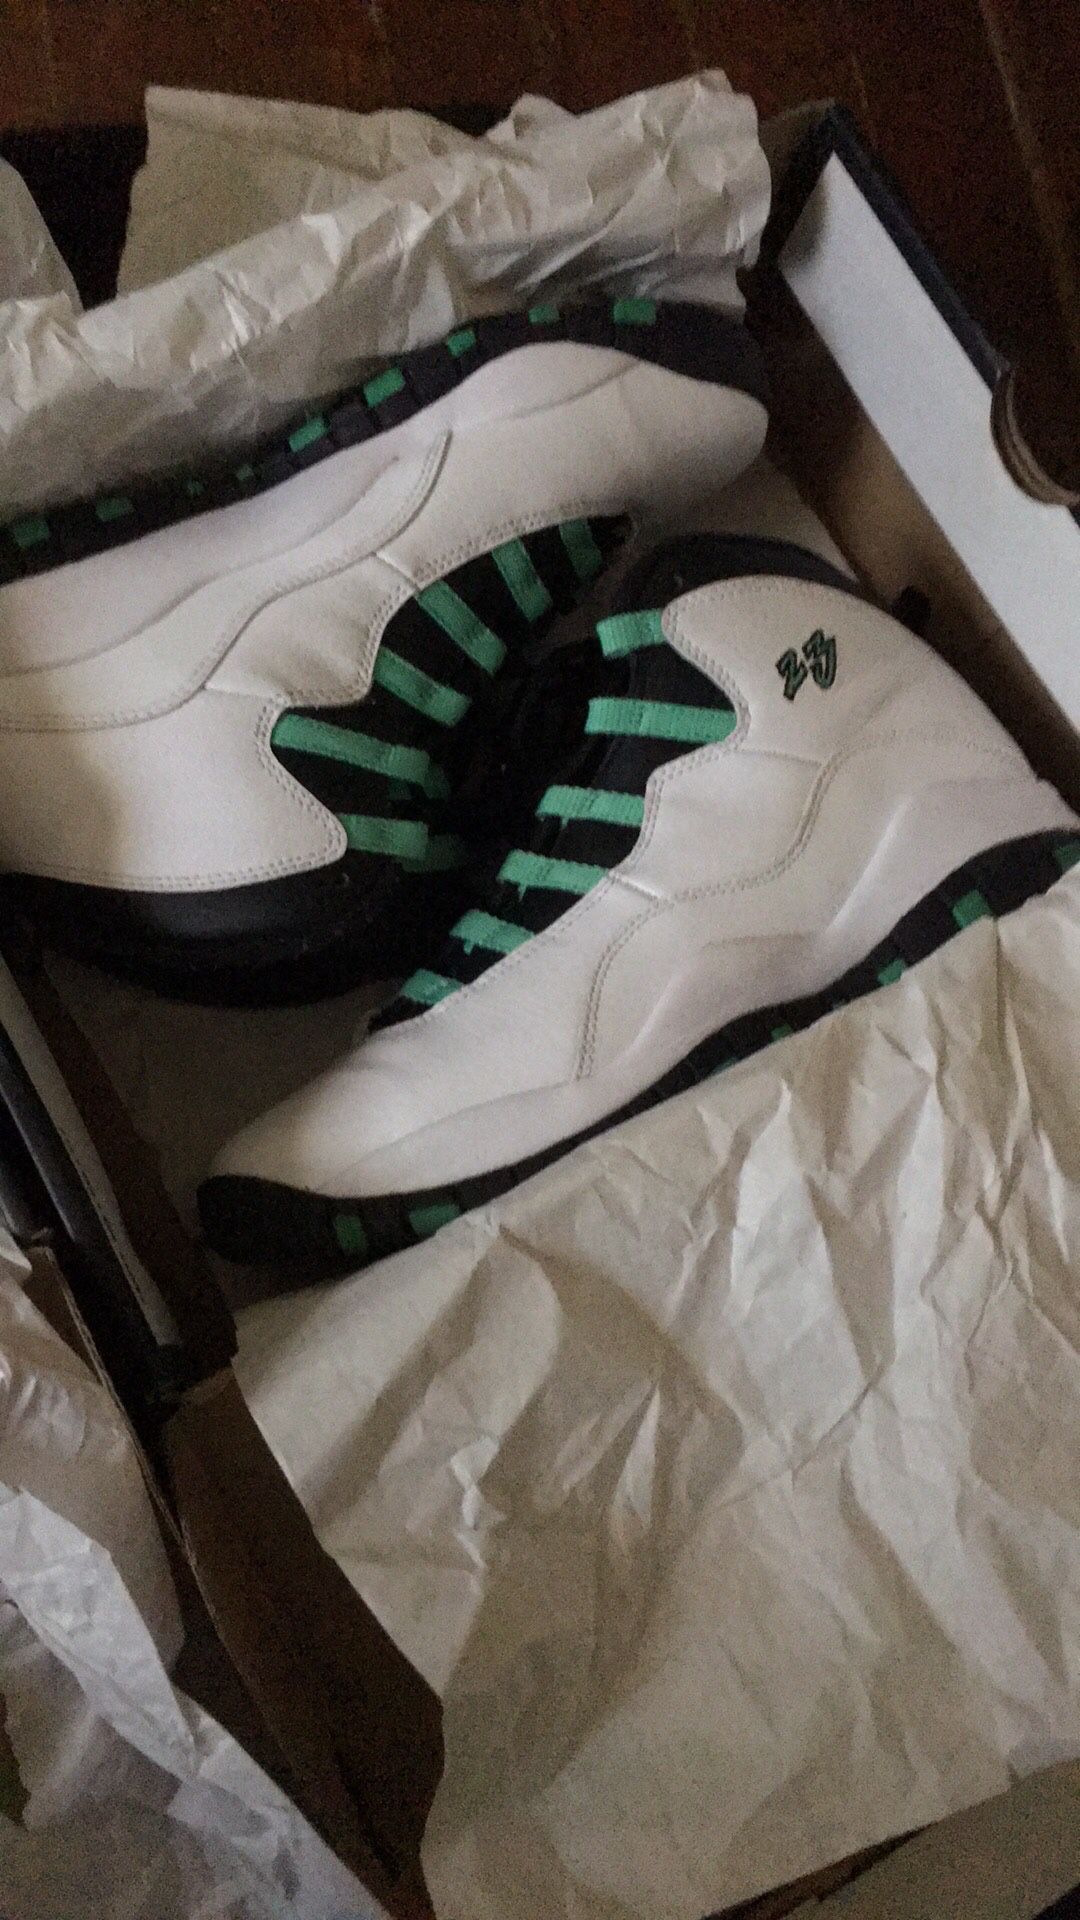 Jordan 10s size 7 for sale with box